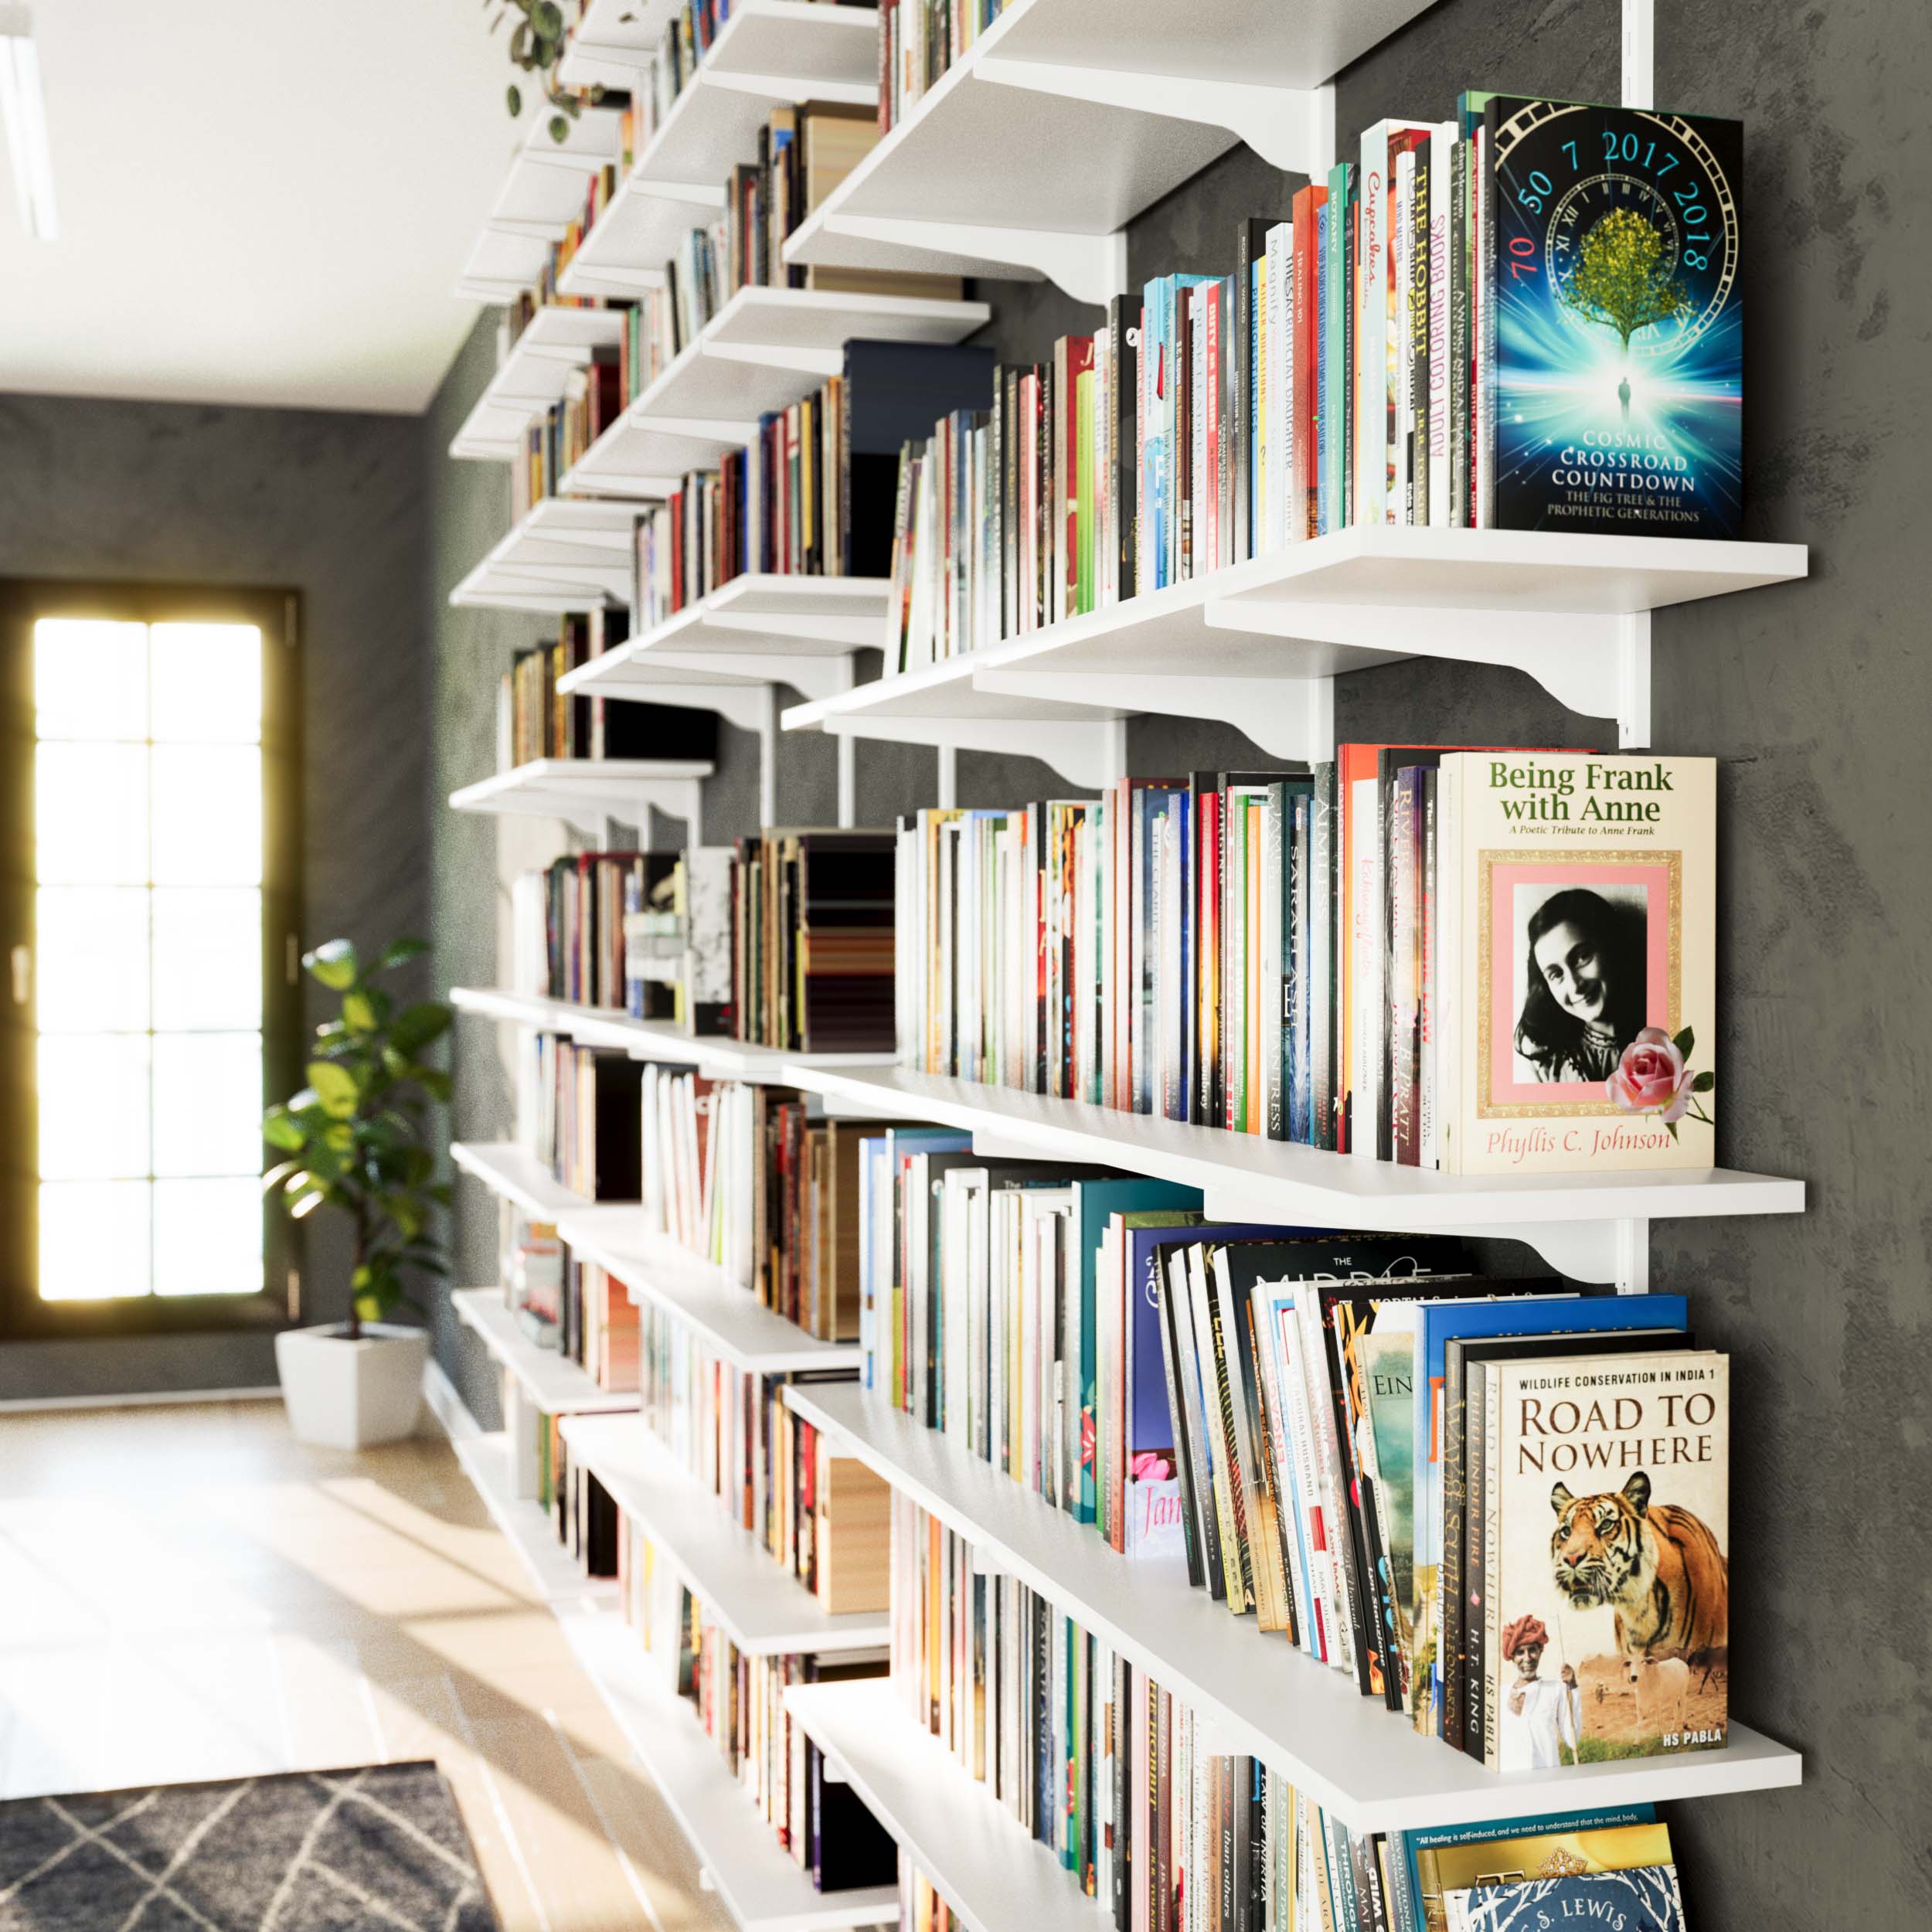 Living room with wall shelves white displaying books, art, and plants above cozy beige sofas.